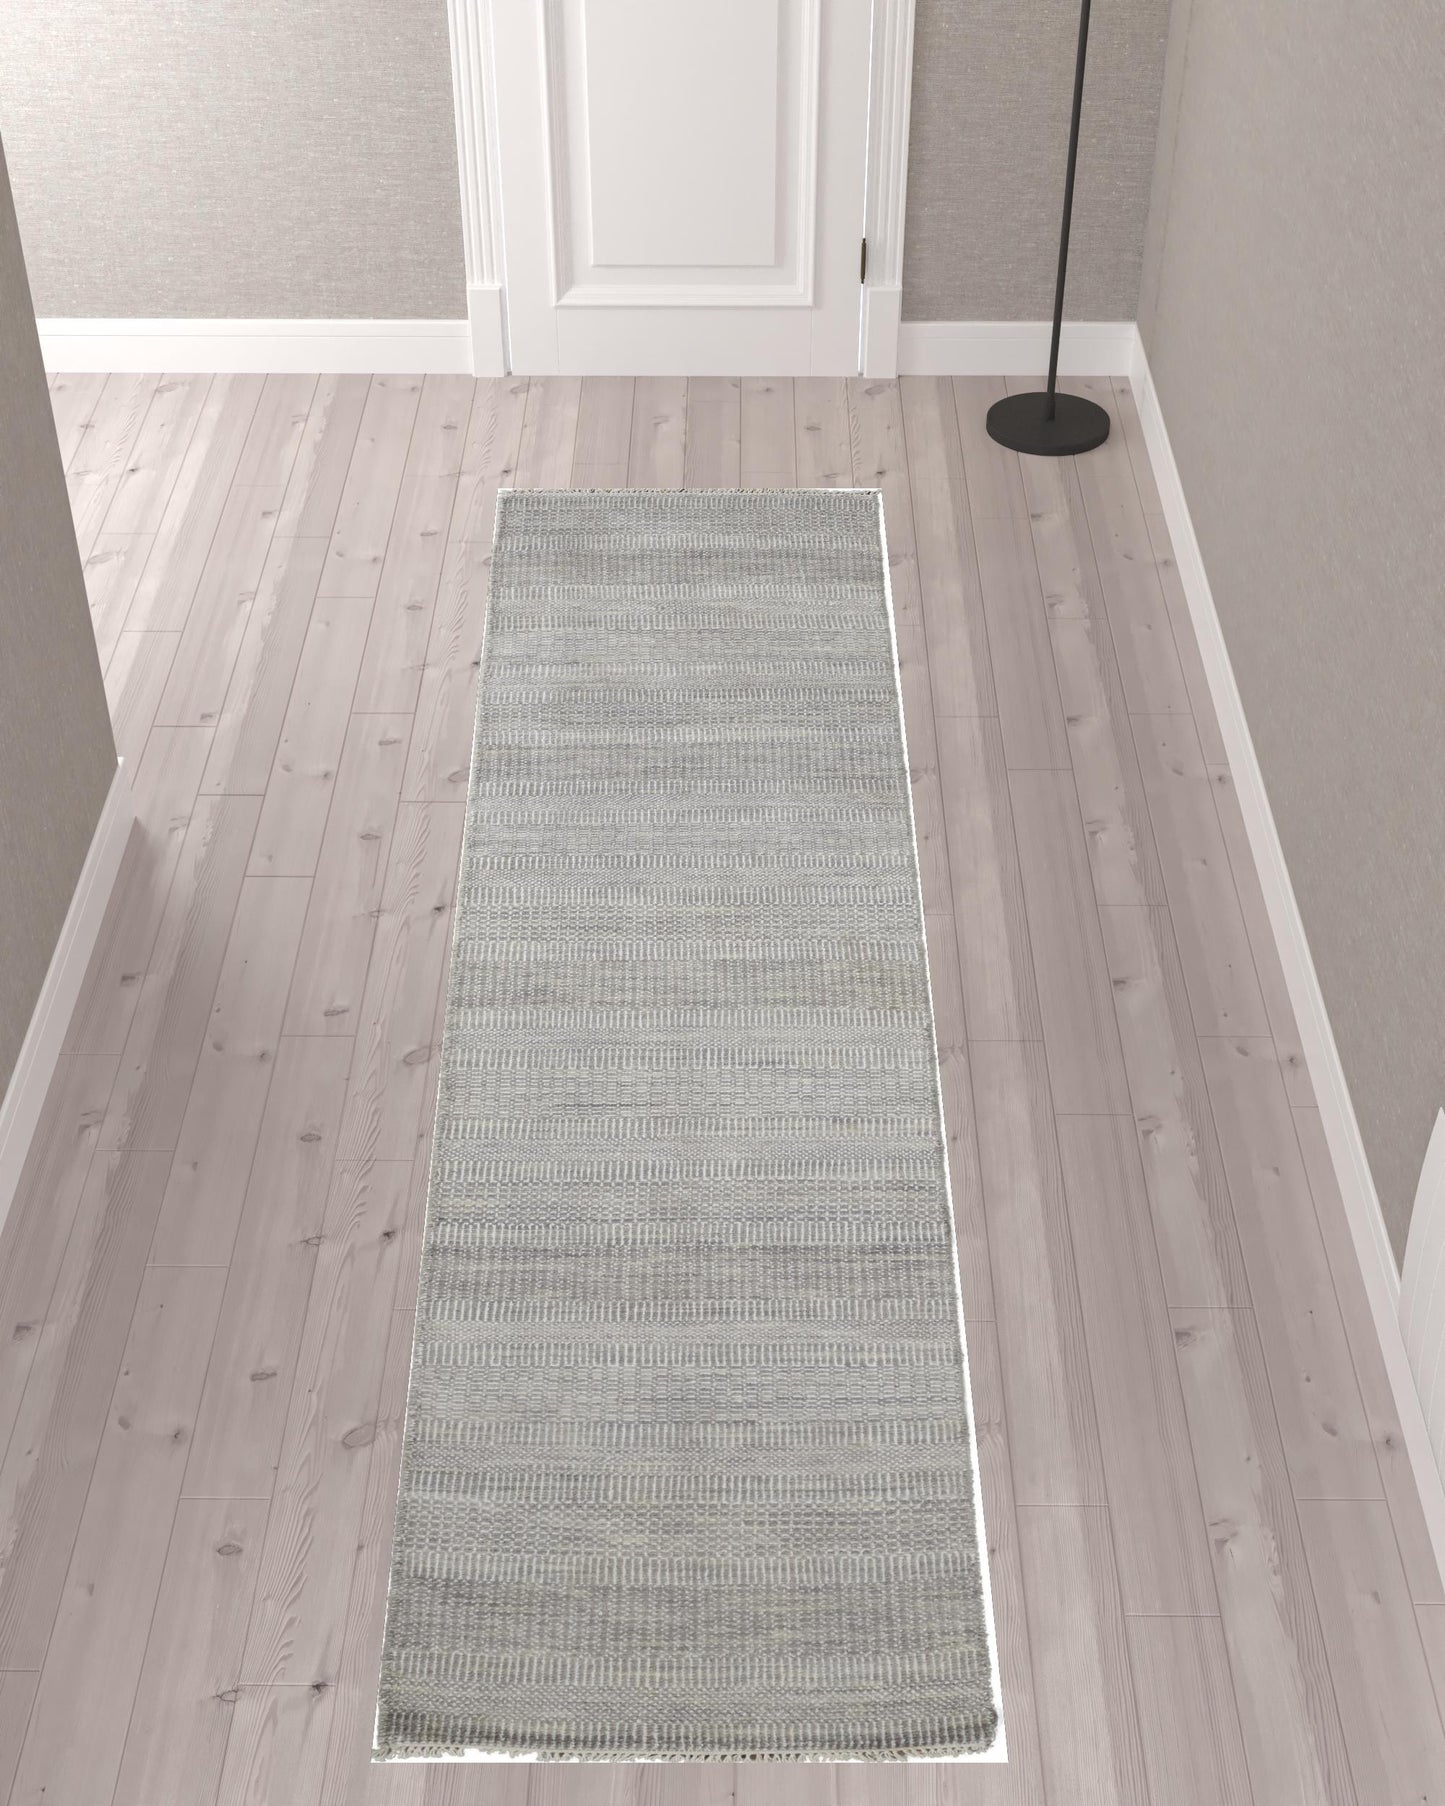 8' X 10' Silver Wool Striped Hand Knotted Area Rug